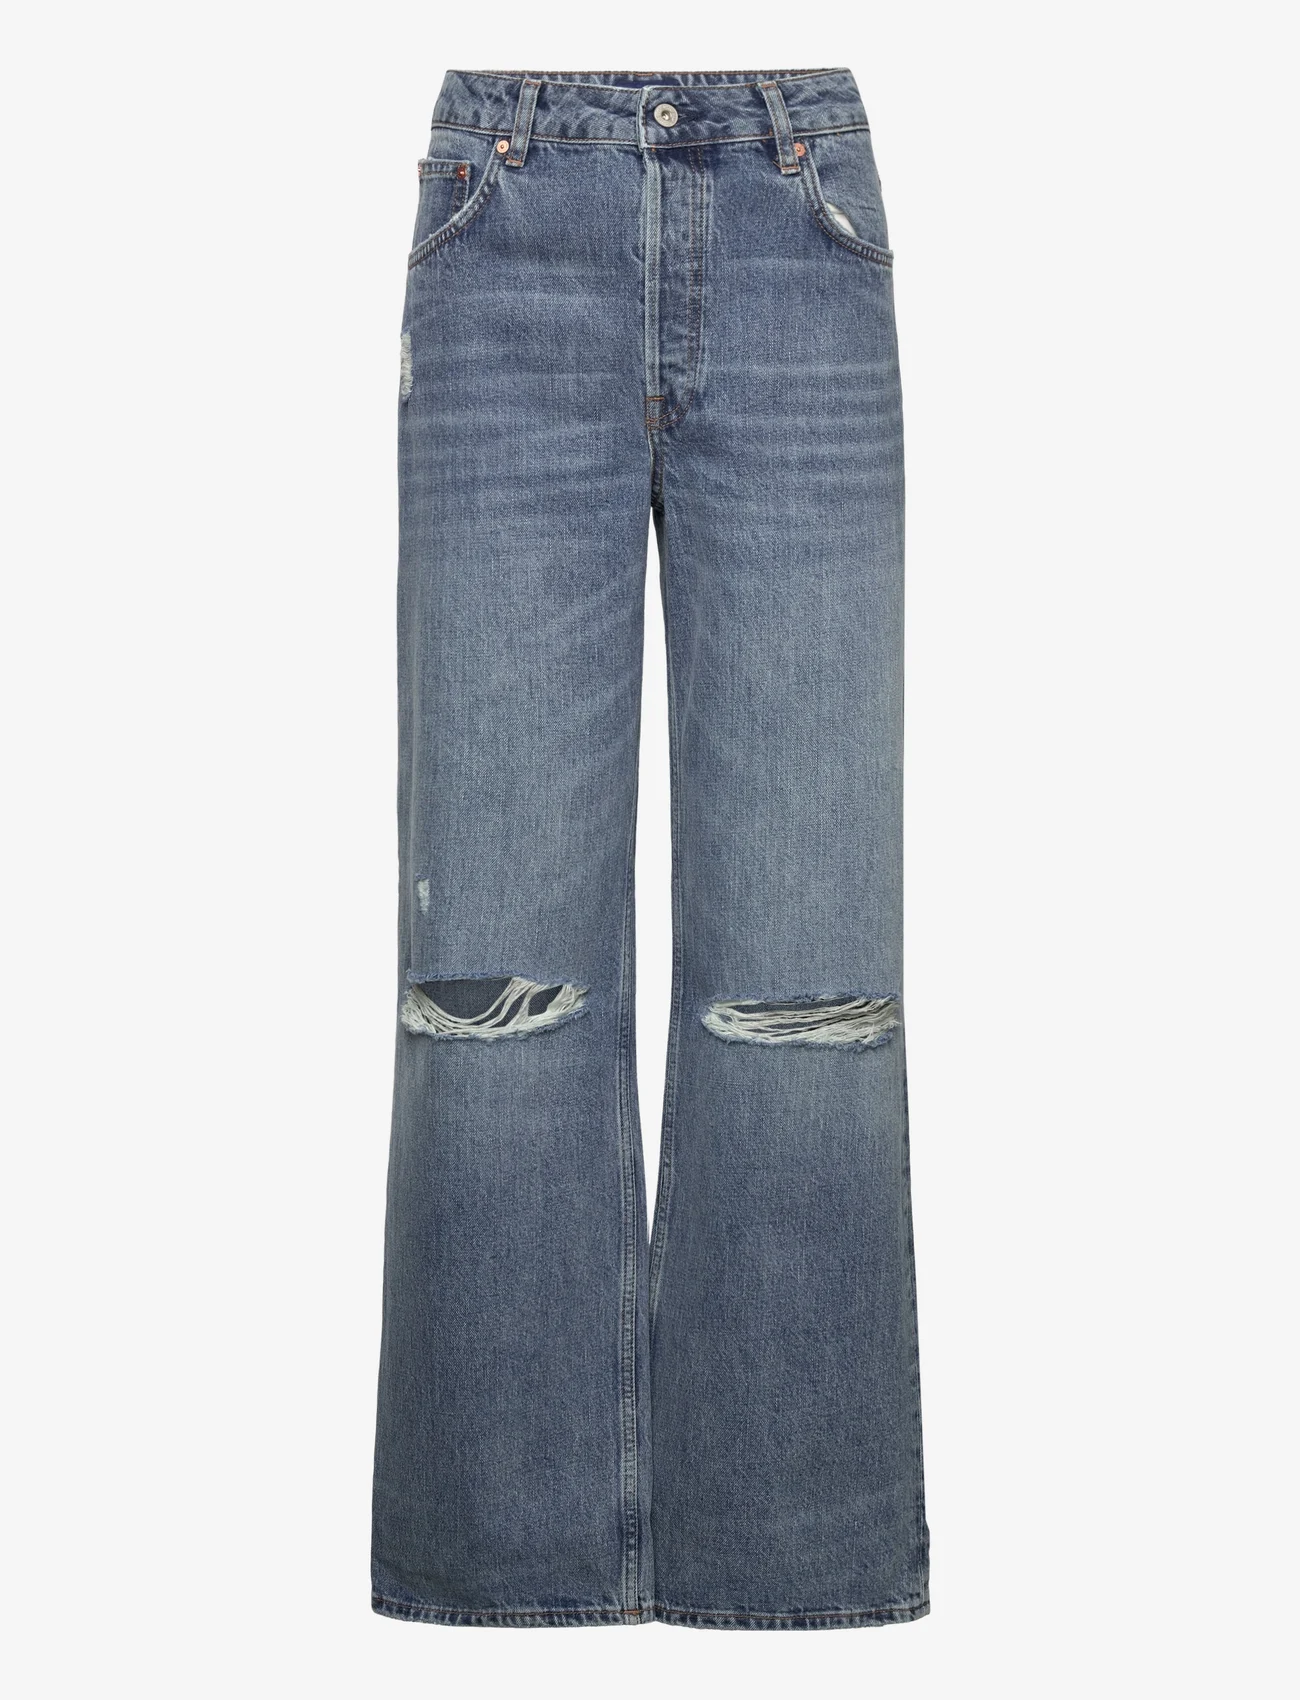 GANT D2. Hw Relaxed Straight Rip Jeans – jeans – shop at Booztlet